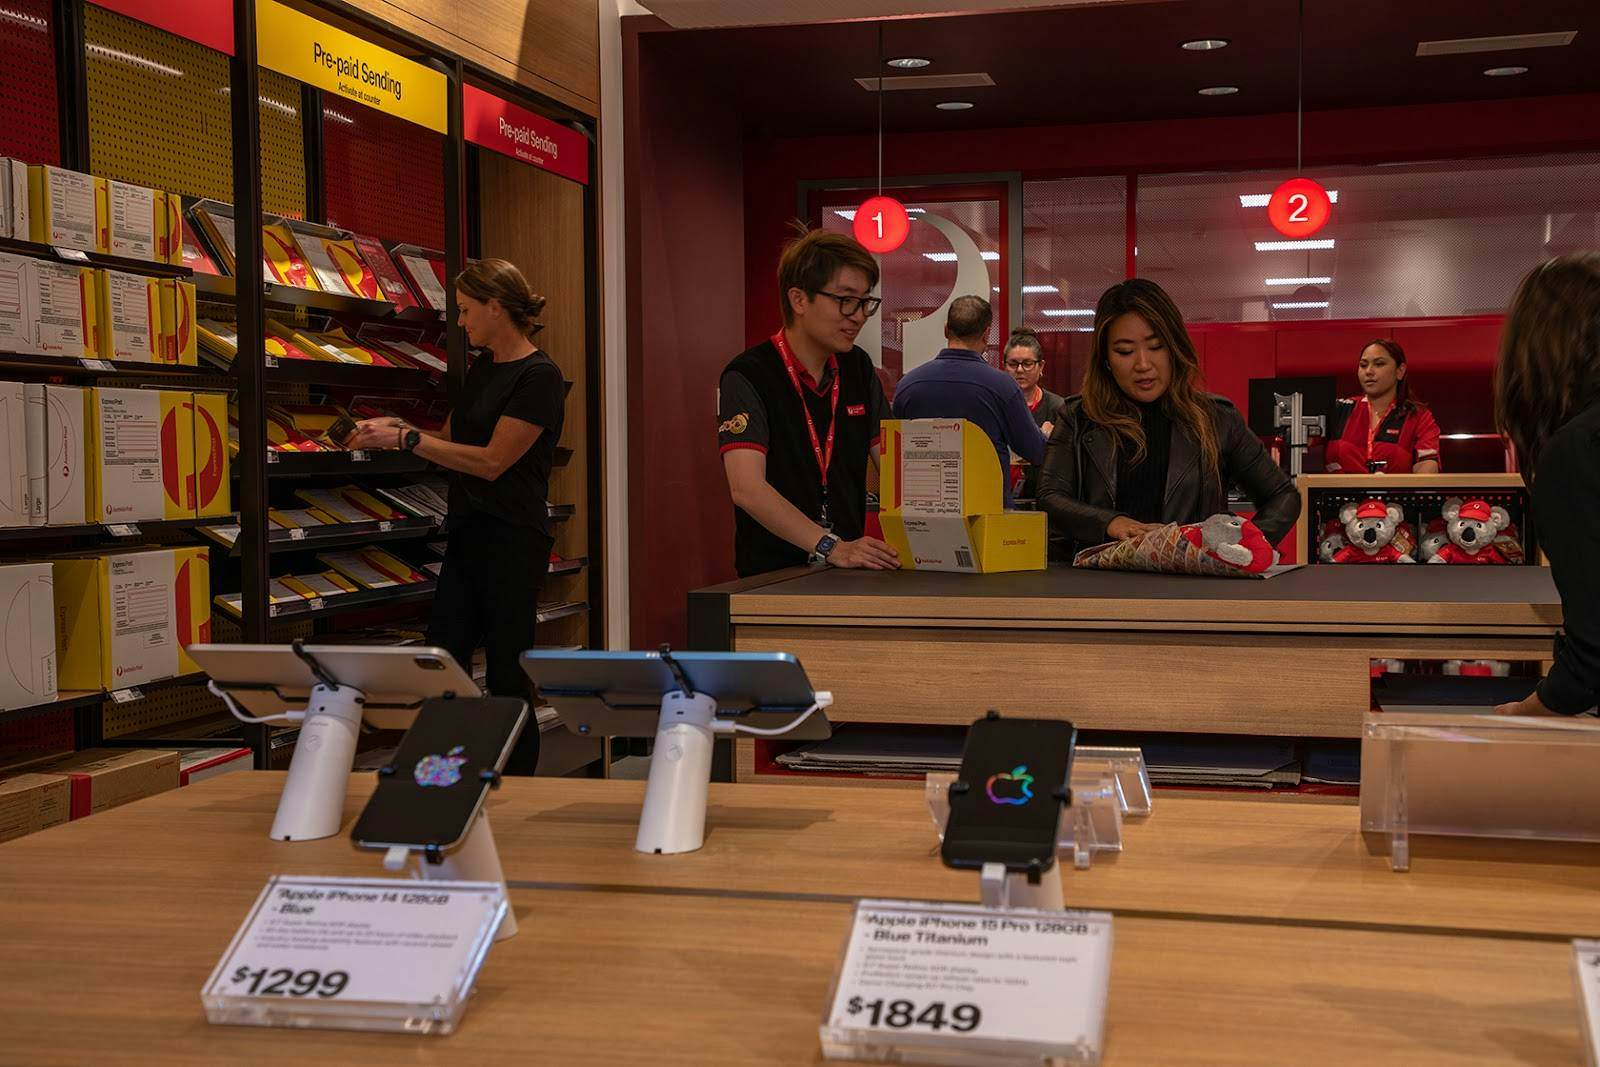 The retail section, including a small Apple Store, in Australia Post's newly designed post office in Orange, New South Wales.